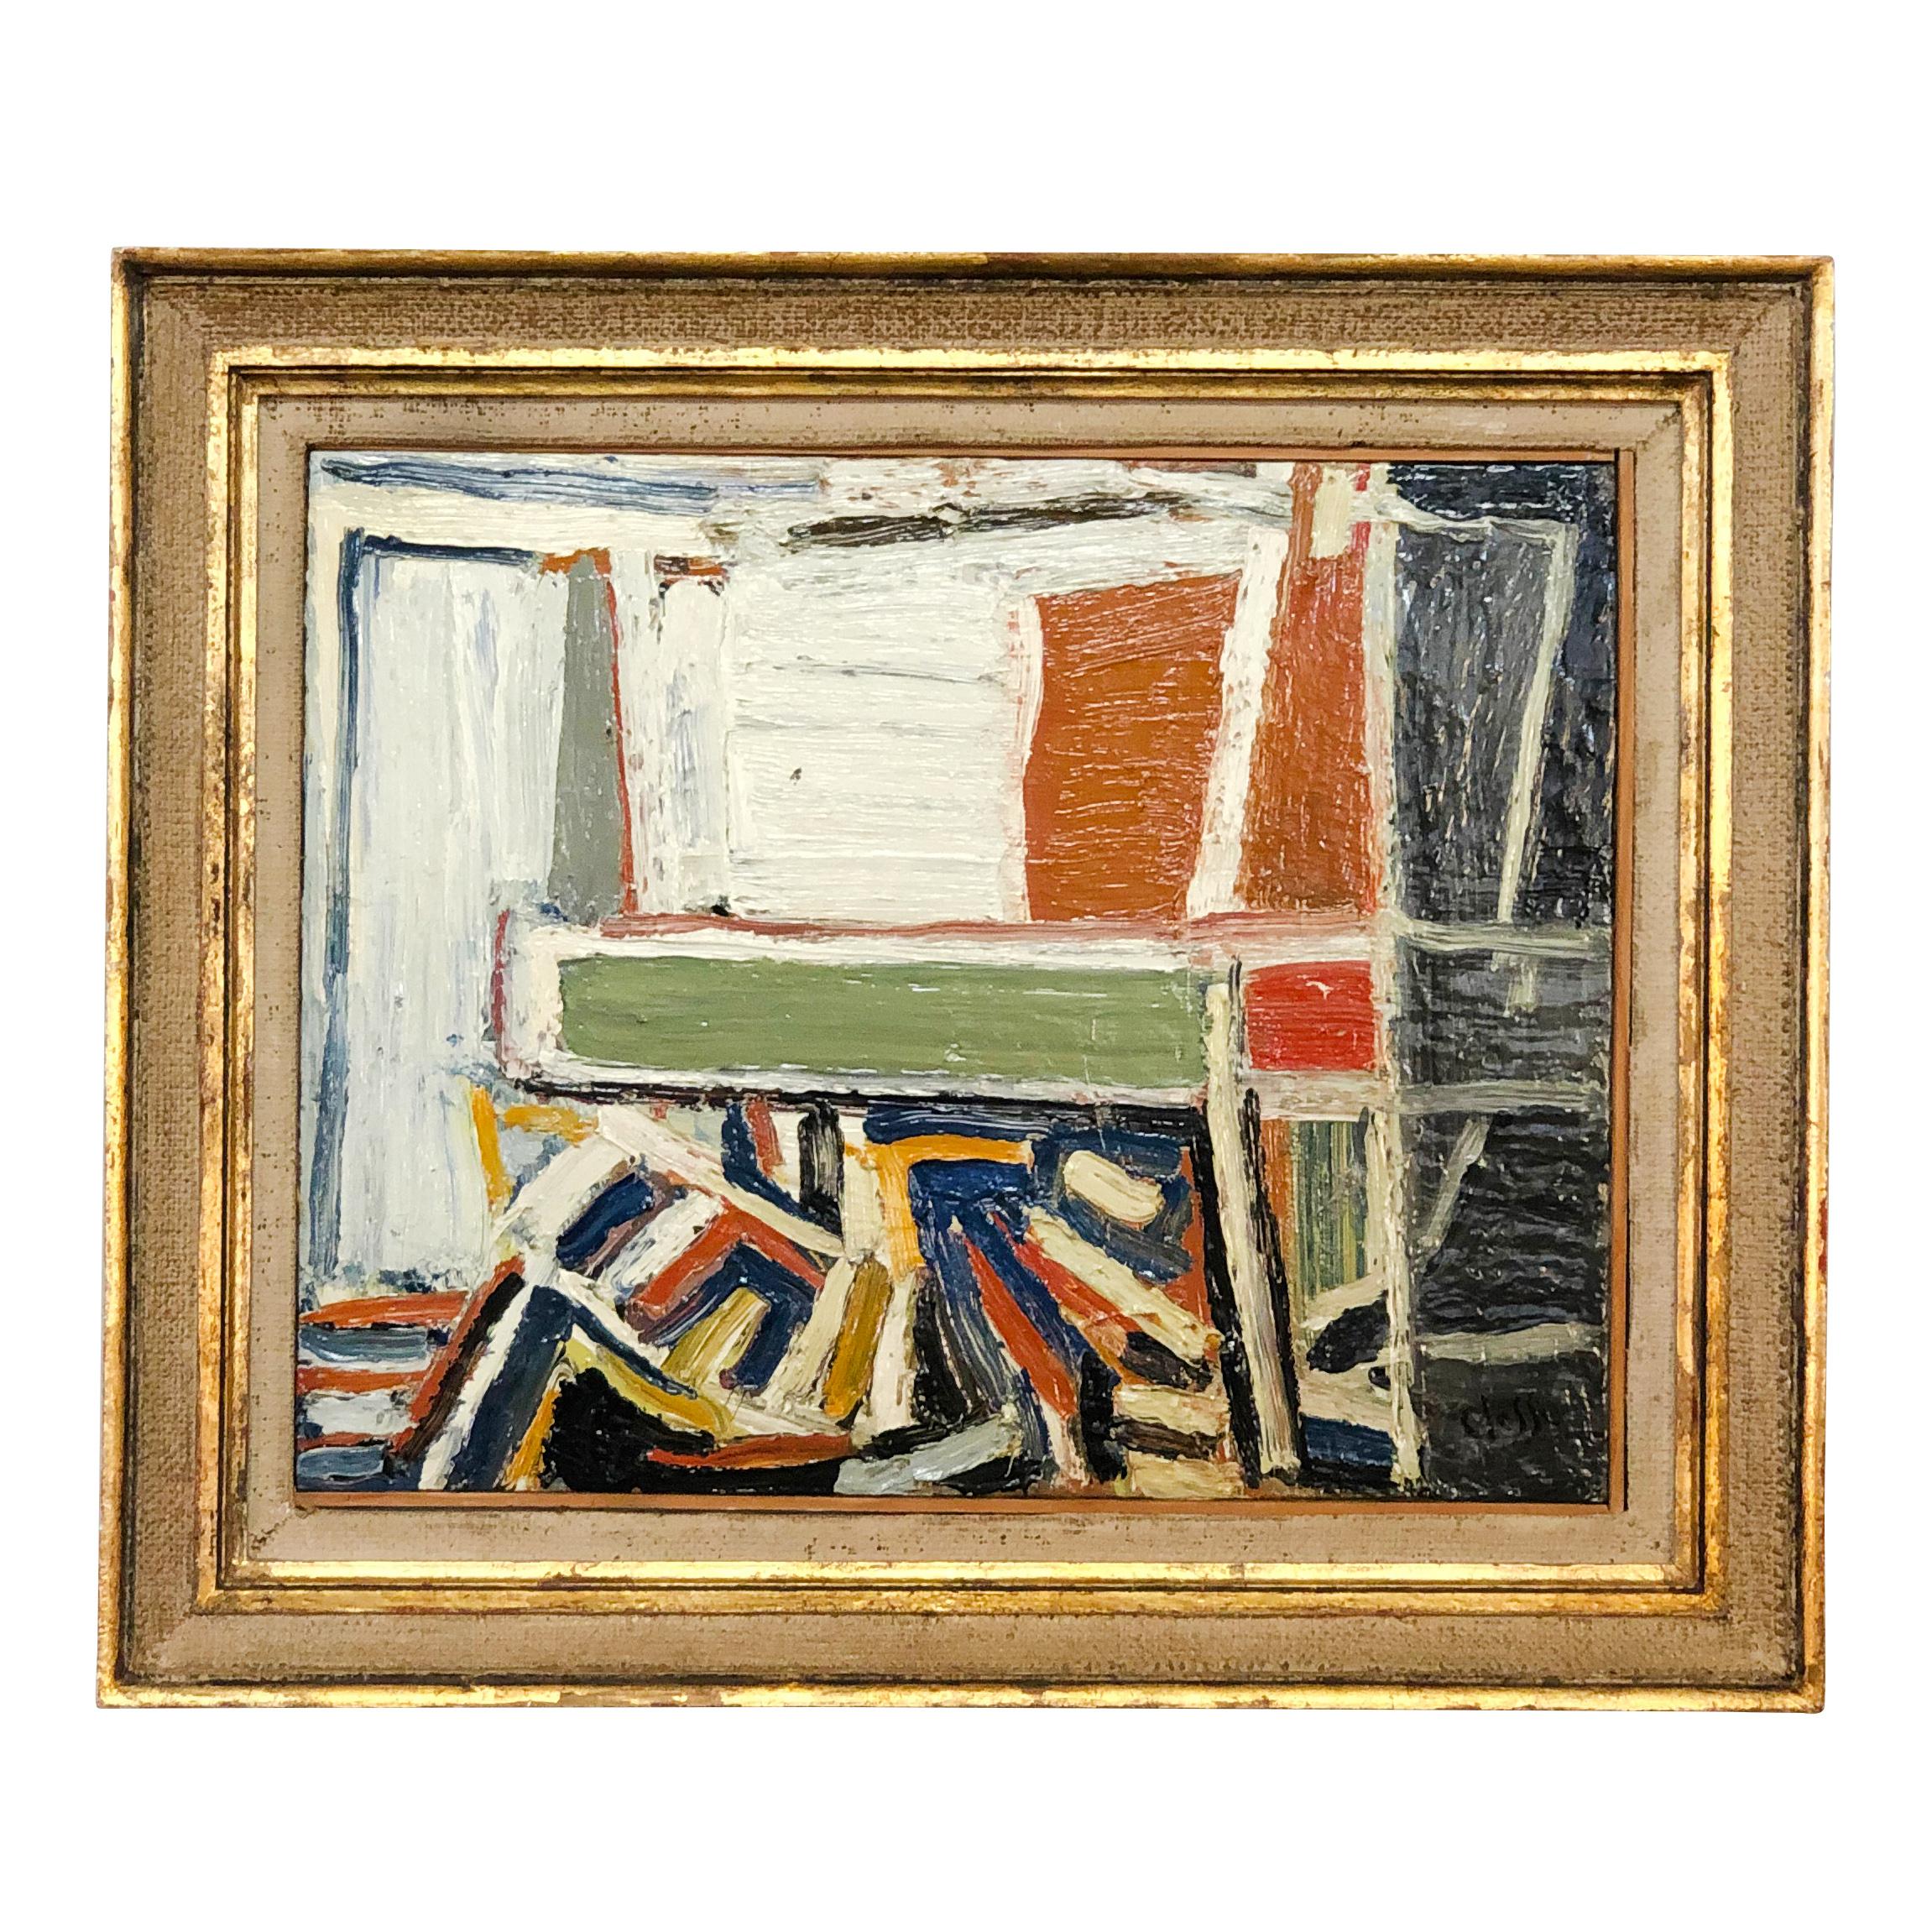 A French painting, abstract books, on wood by Daniel Clesse, painted in France, signed and dated circa 1993.

Without the frame: 15.5